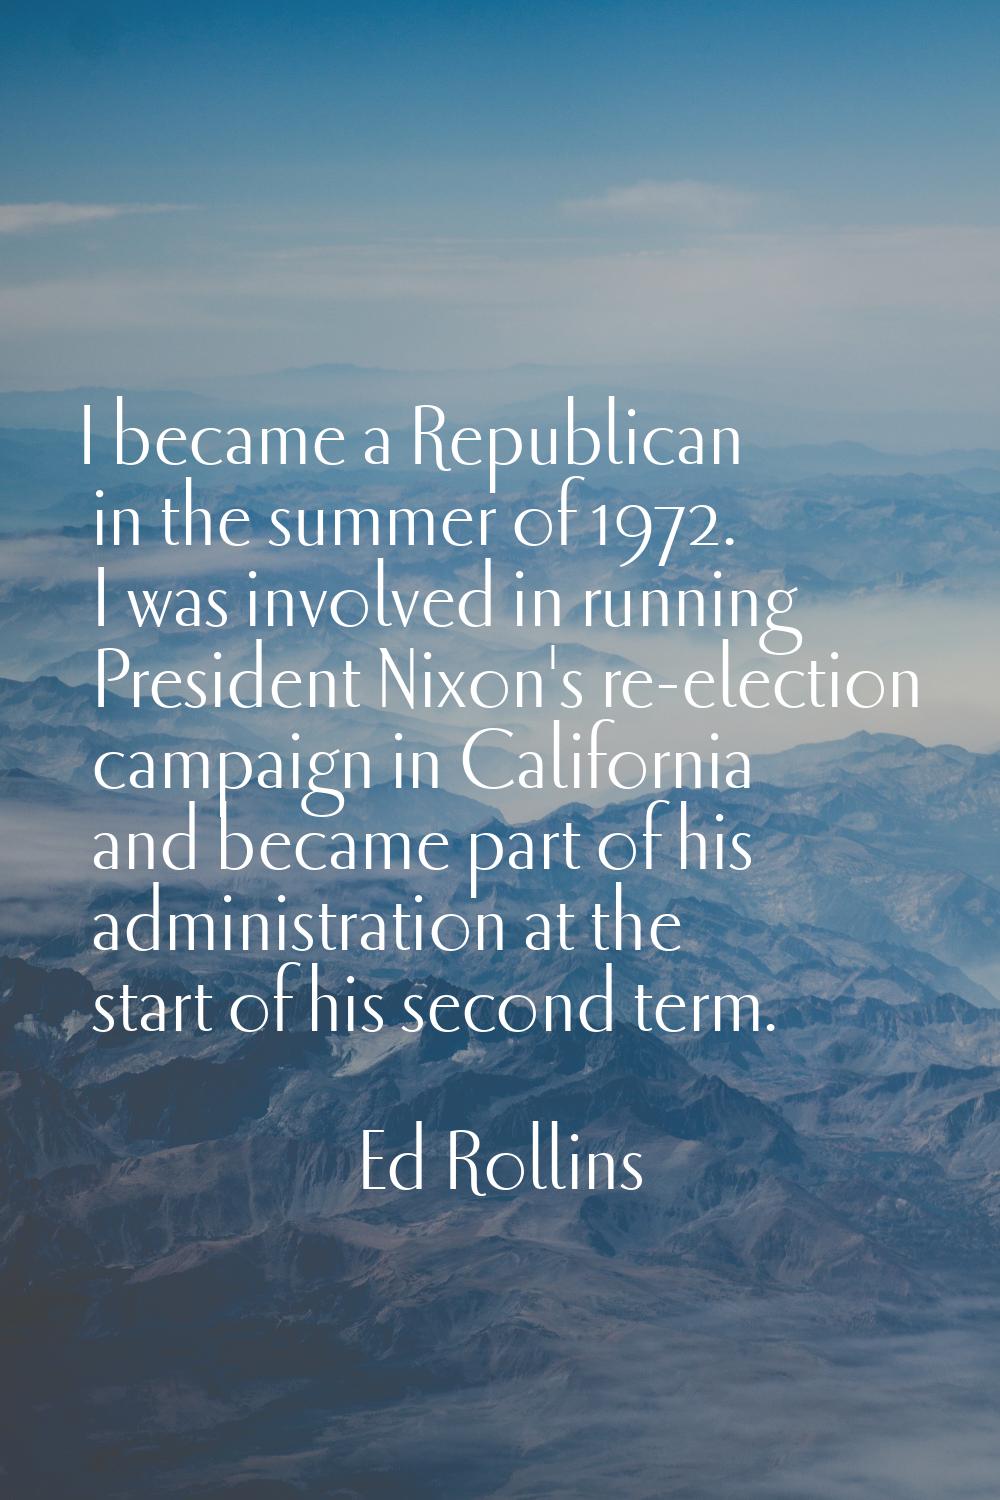 I became a Republican in the summer of 1972. I was involved in running President Nixon's re-electio